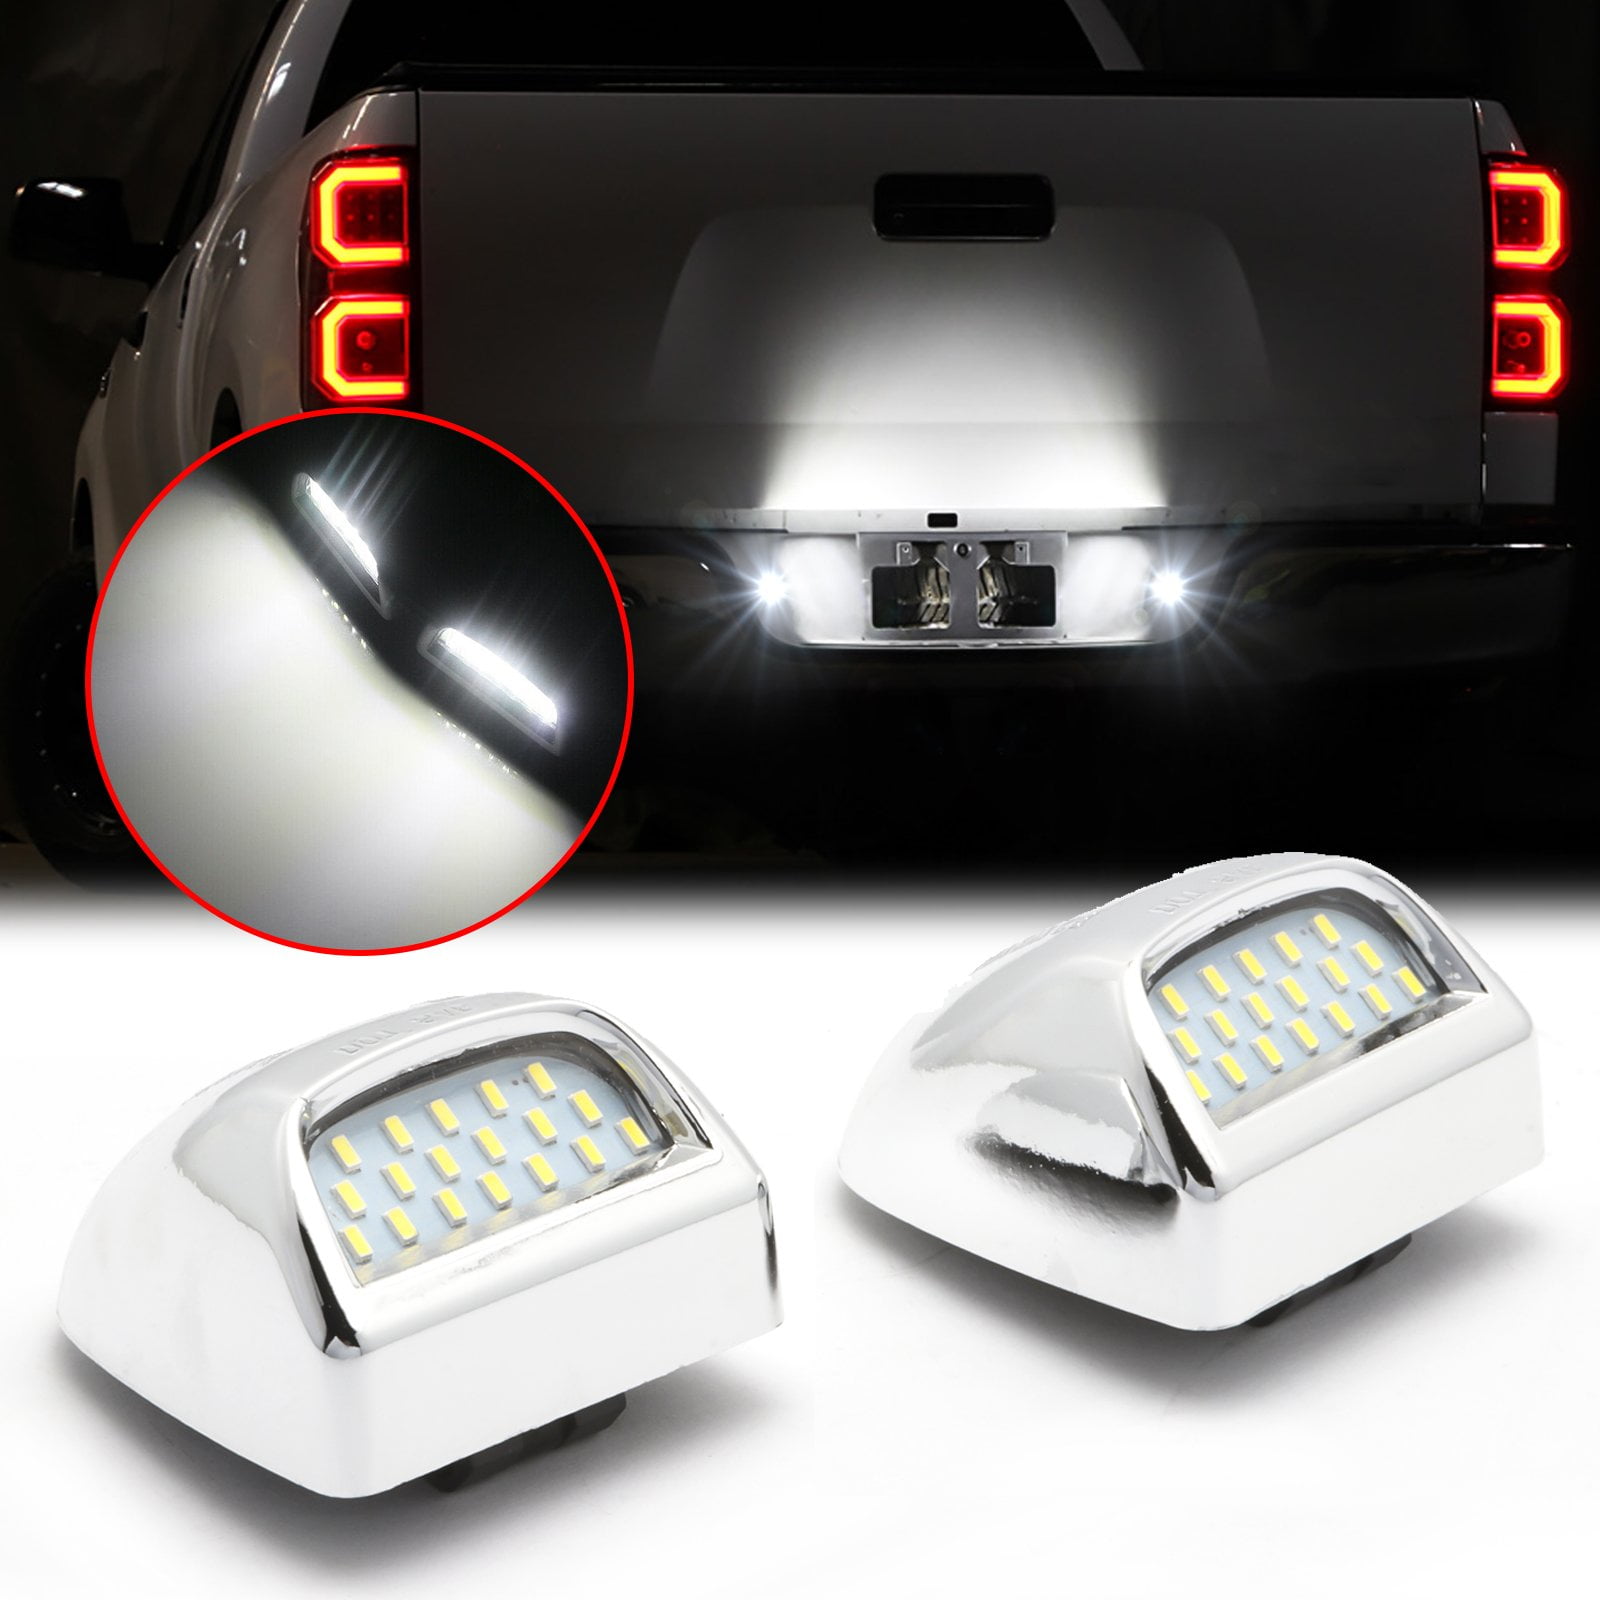 Xotic Tech White LED License Plate Light Tag Lamp Assembly Housing Pair  Replacement For Chevy Silverado GMC Sierra 1500 2500 3500 Suburban Tahoe  Yukon XL Cadillac Escalade 